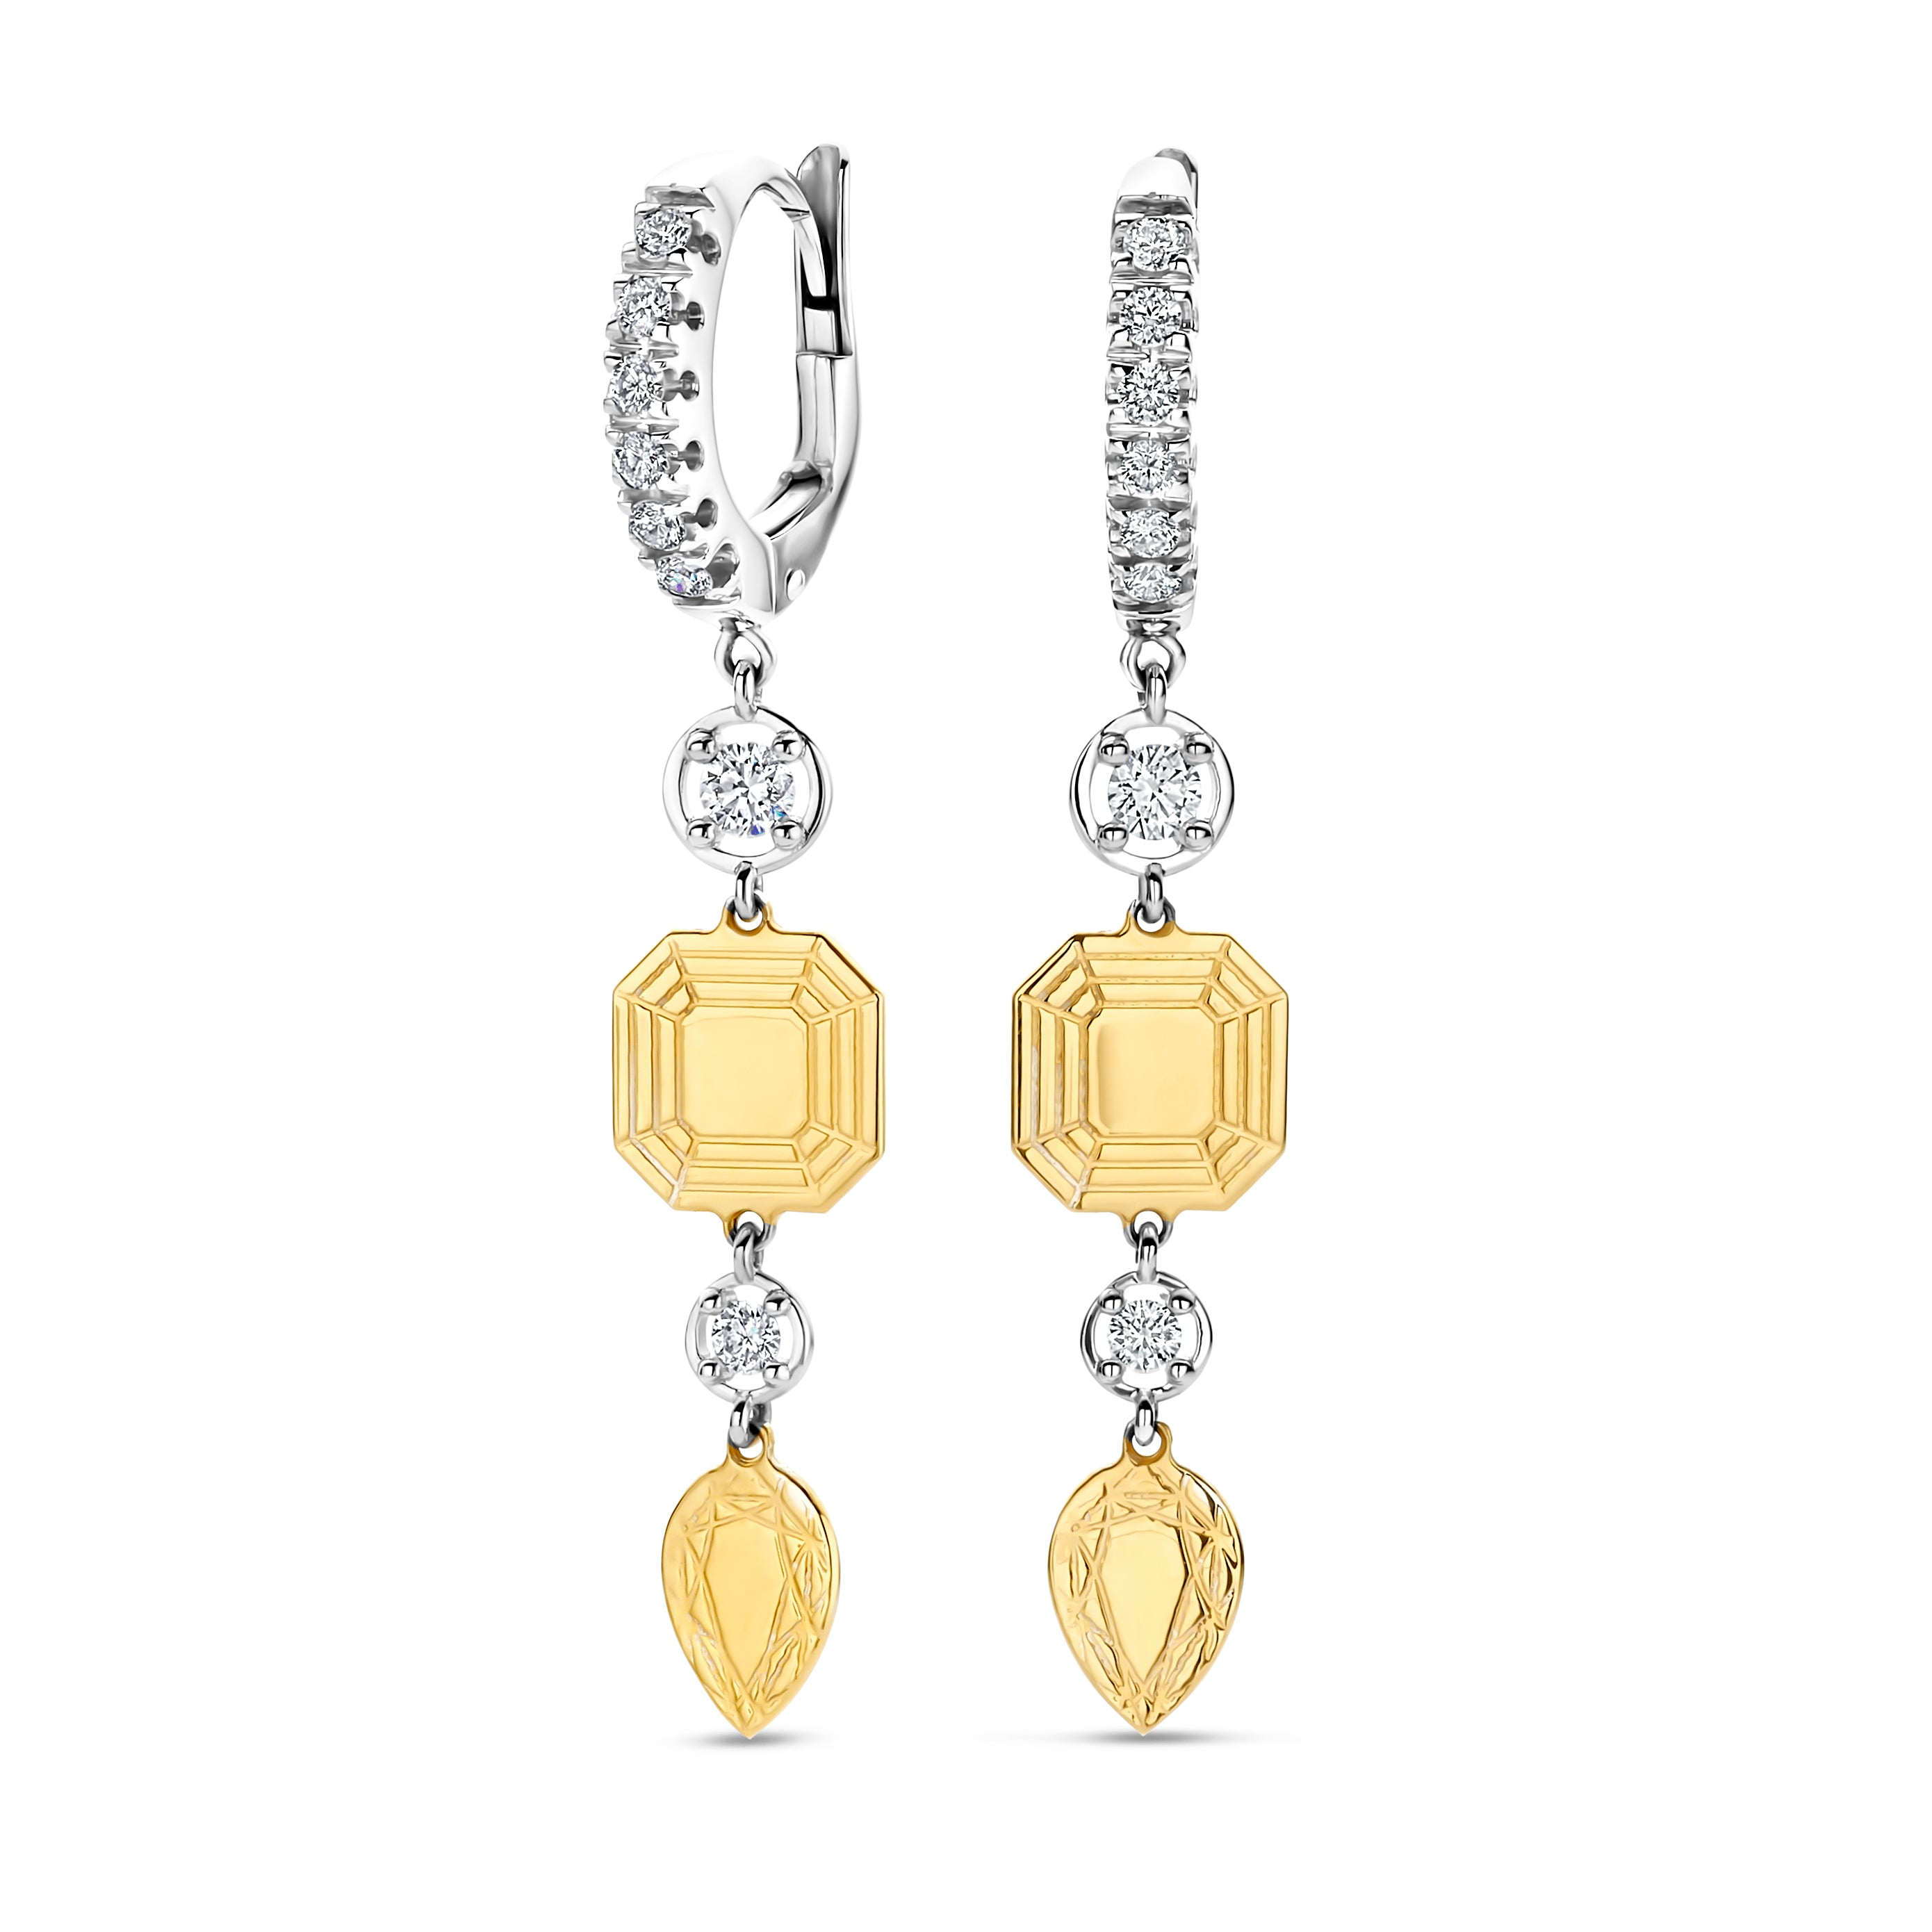 Shapes of ♥♥♥ earrings with 0.23 total diamond weight